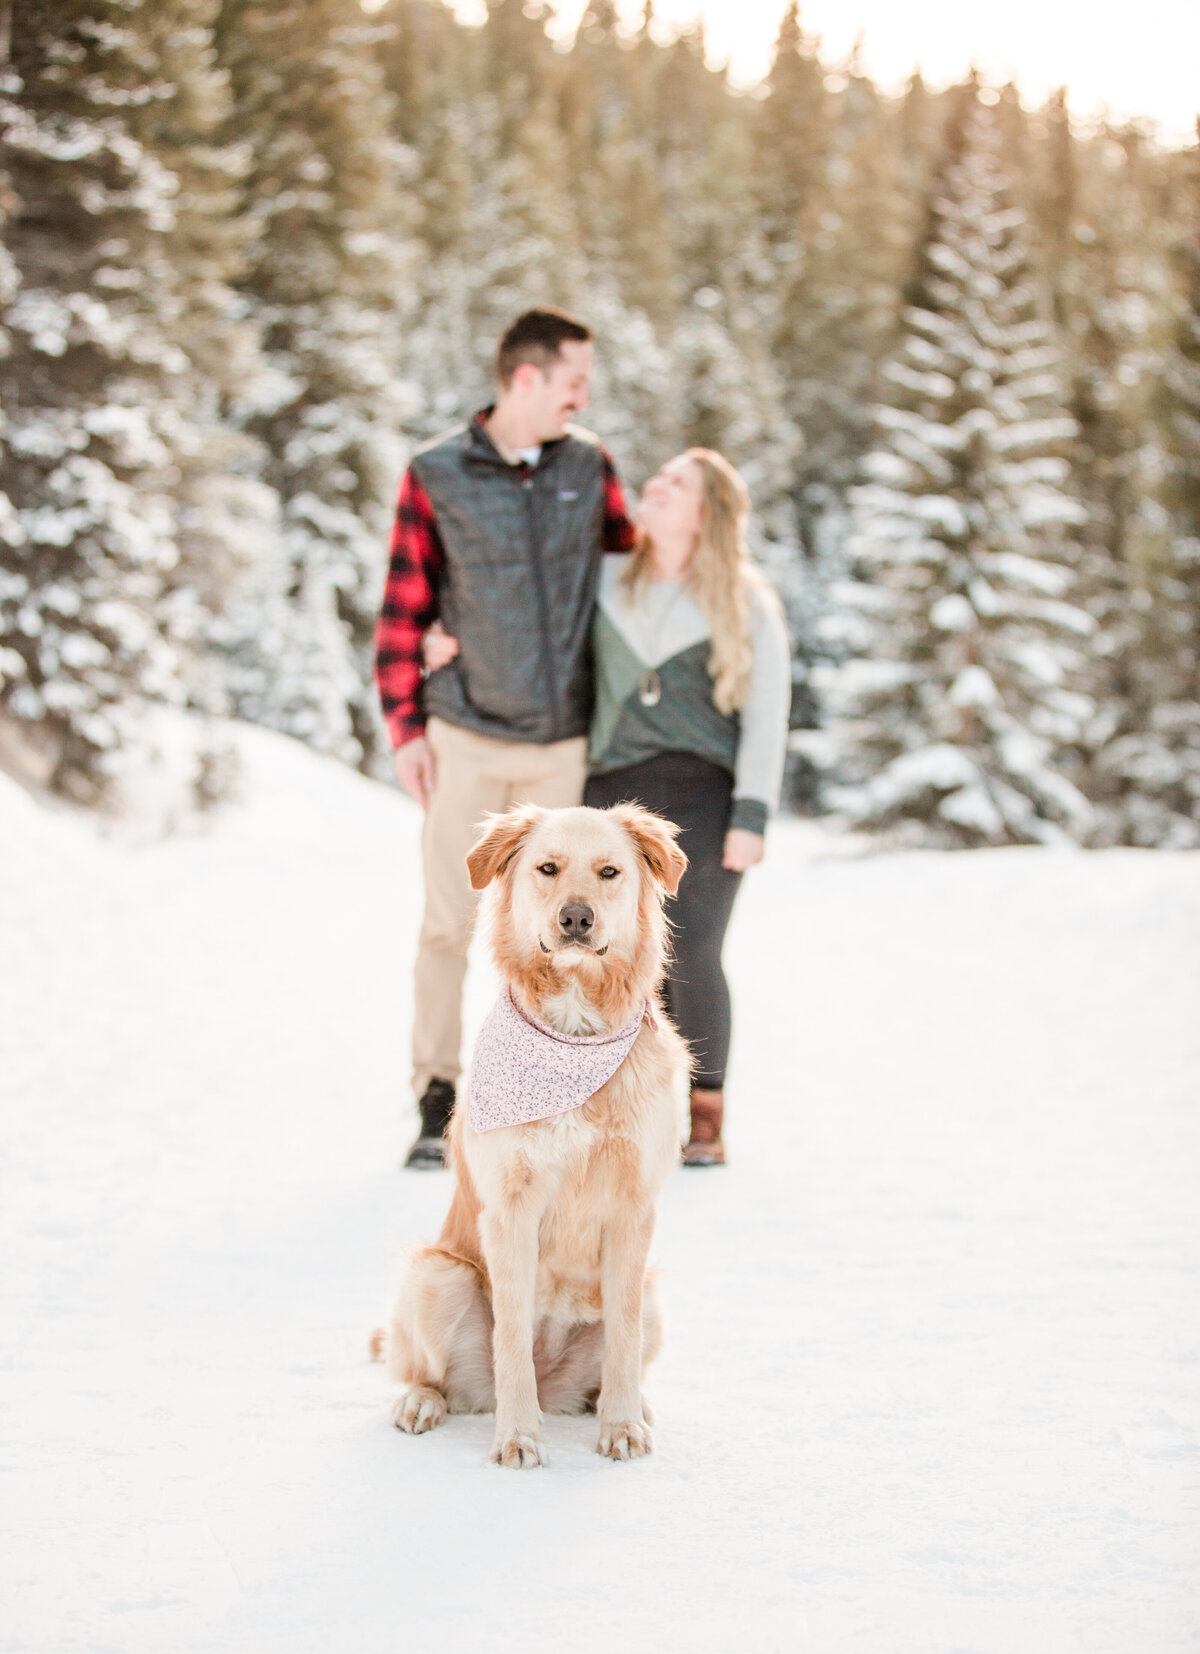 A golden retriever is in the middle of the photo with a newly engaged couple out of focus behind it. The man and woman are looking at each other with a winter scene of trees and snow behind them